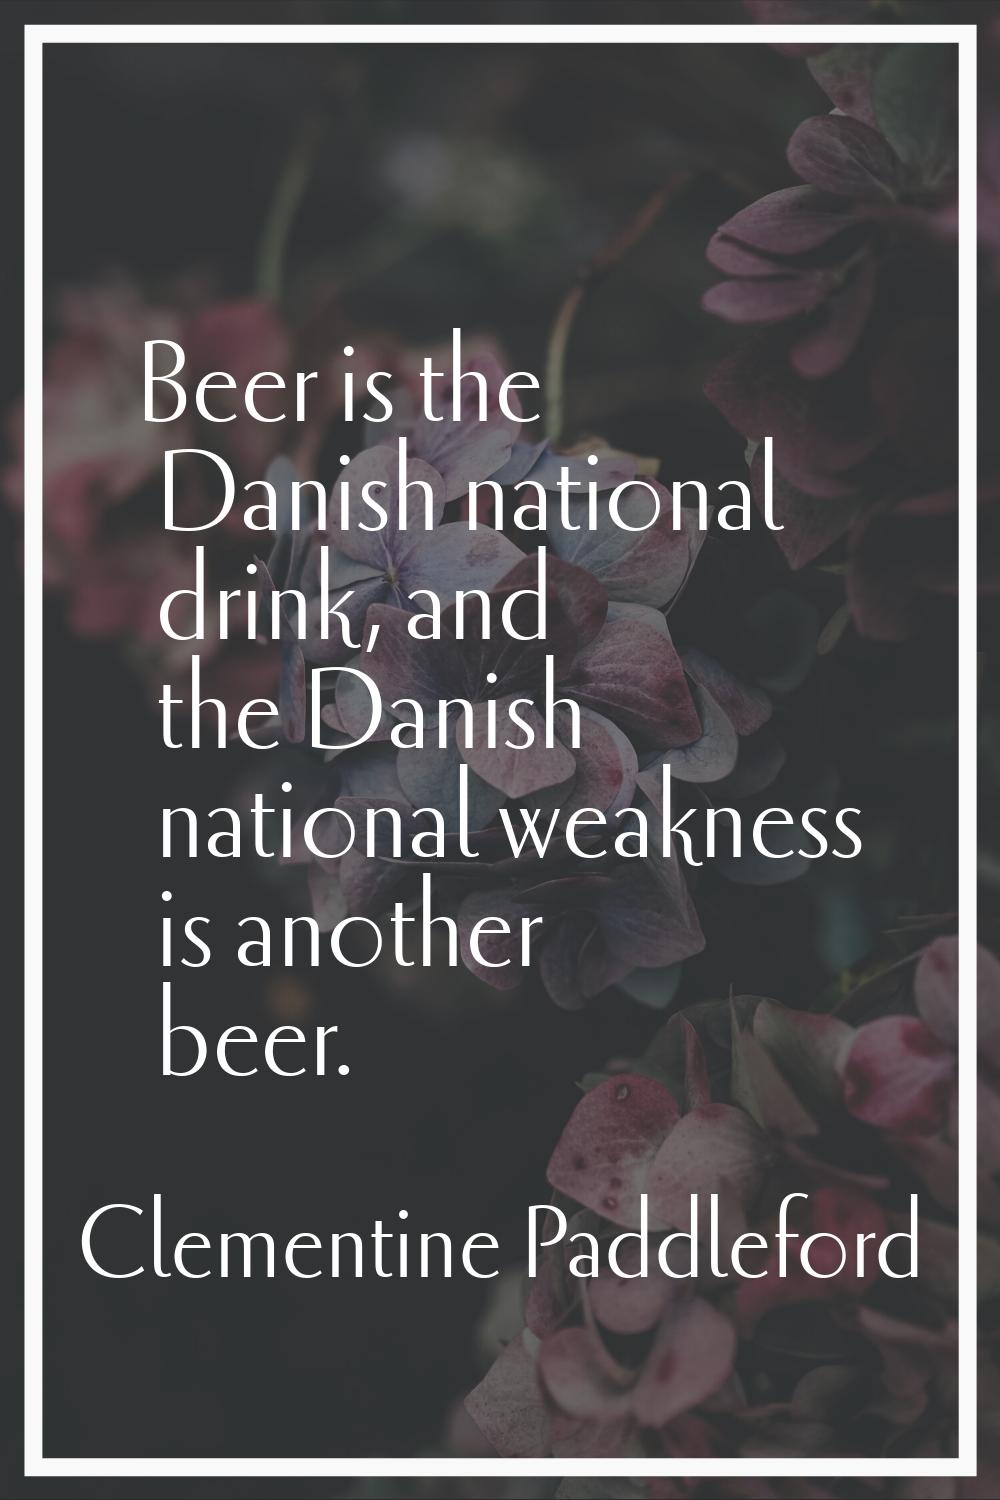 Beer is the Danish national drink, and the Danish national weakness is another beer.